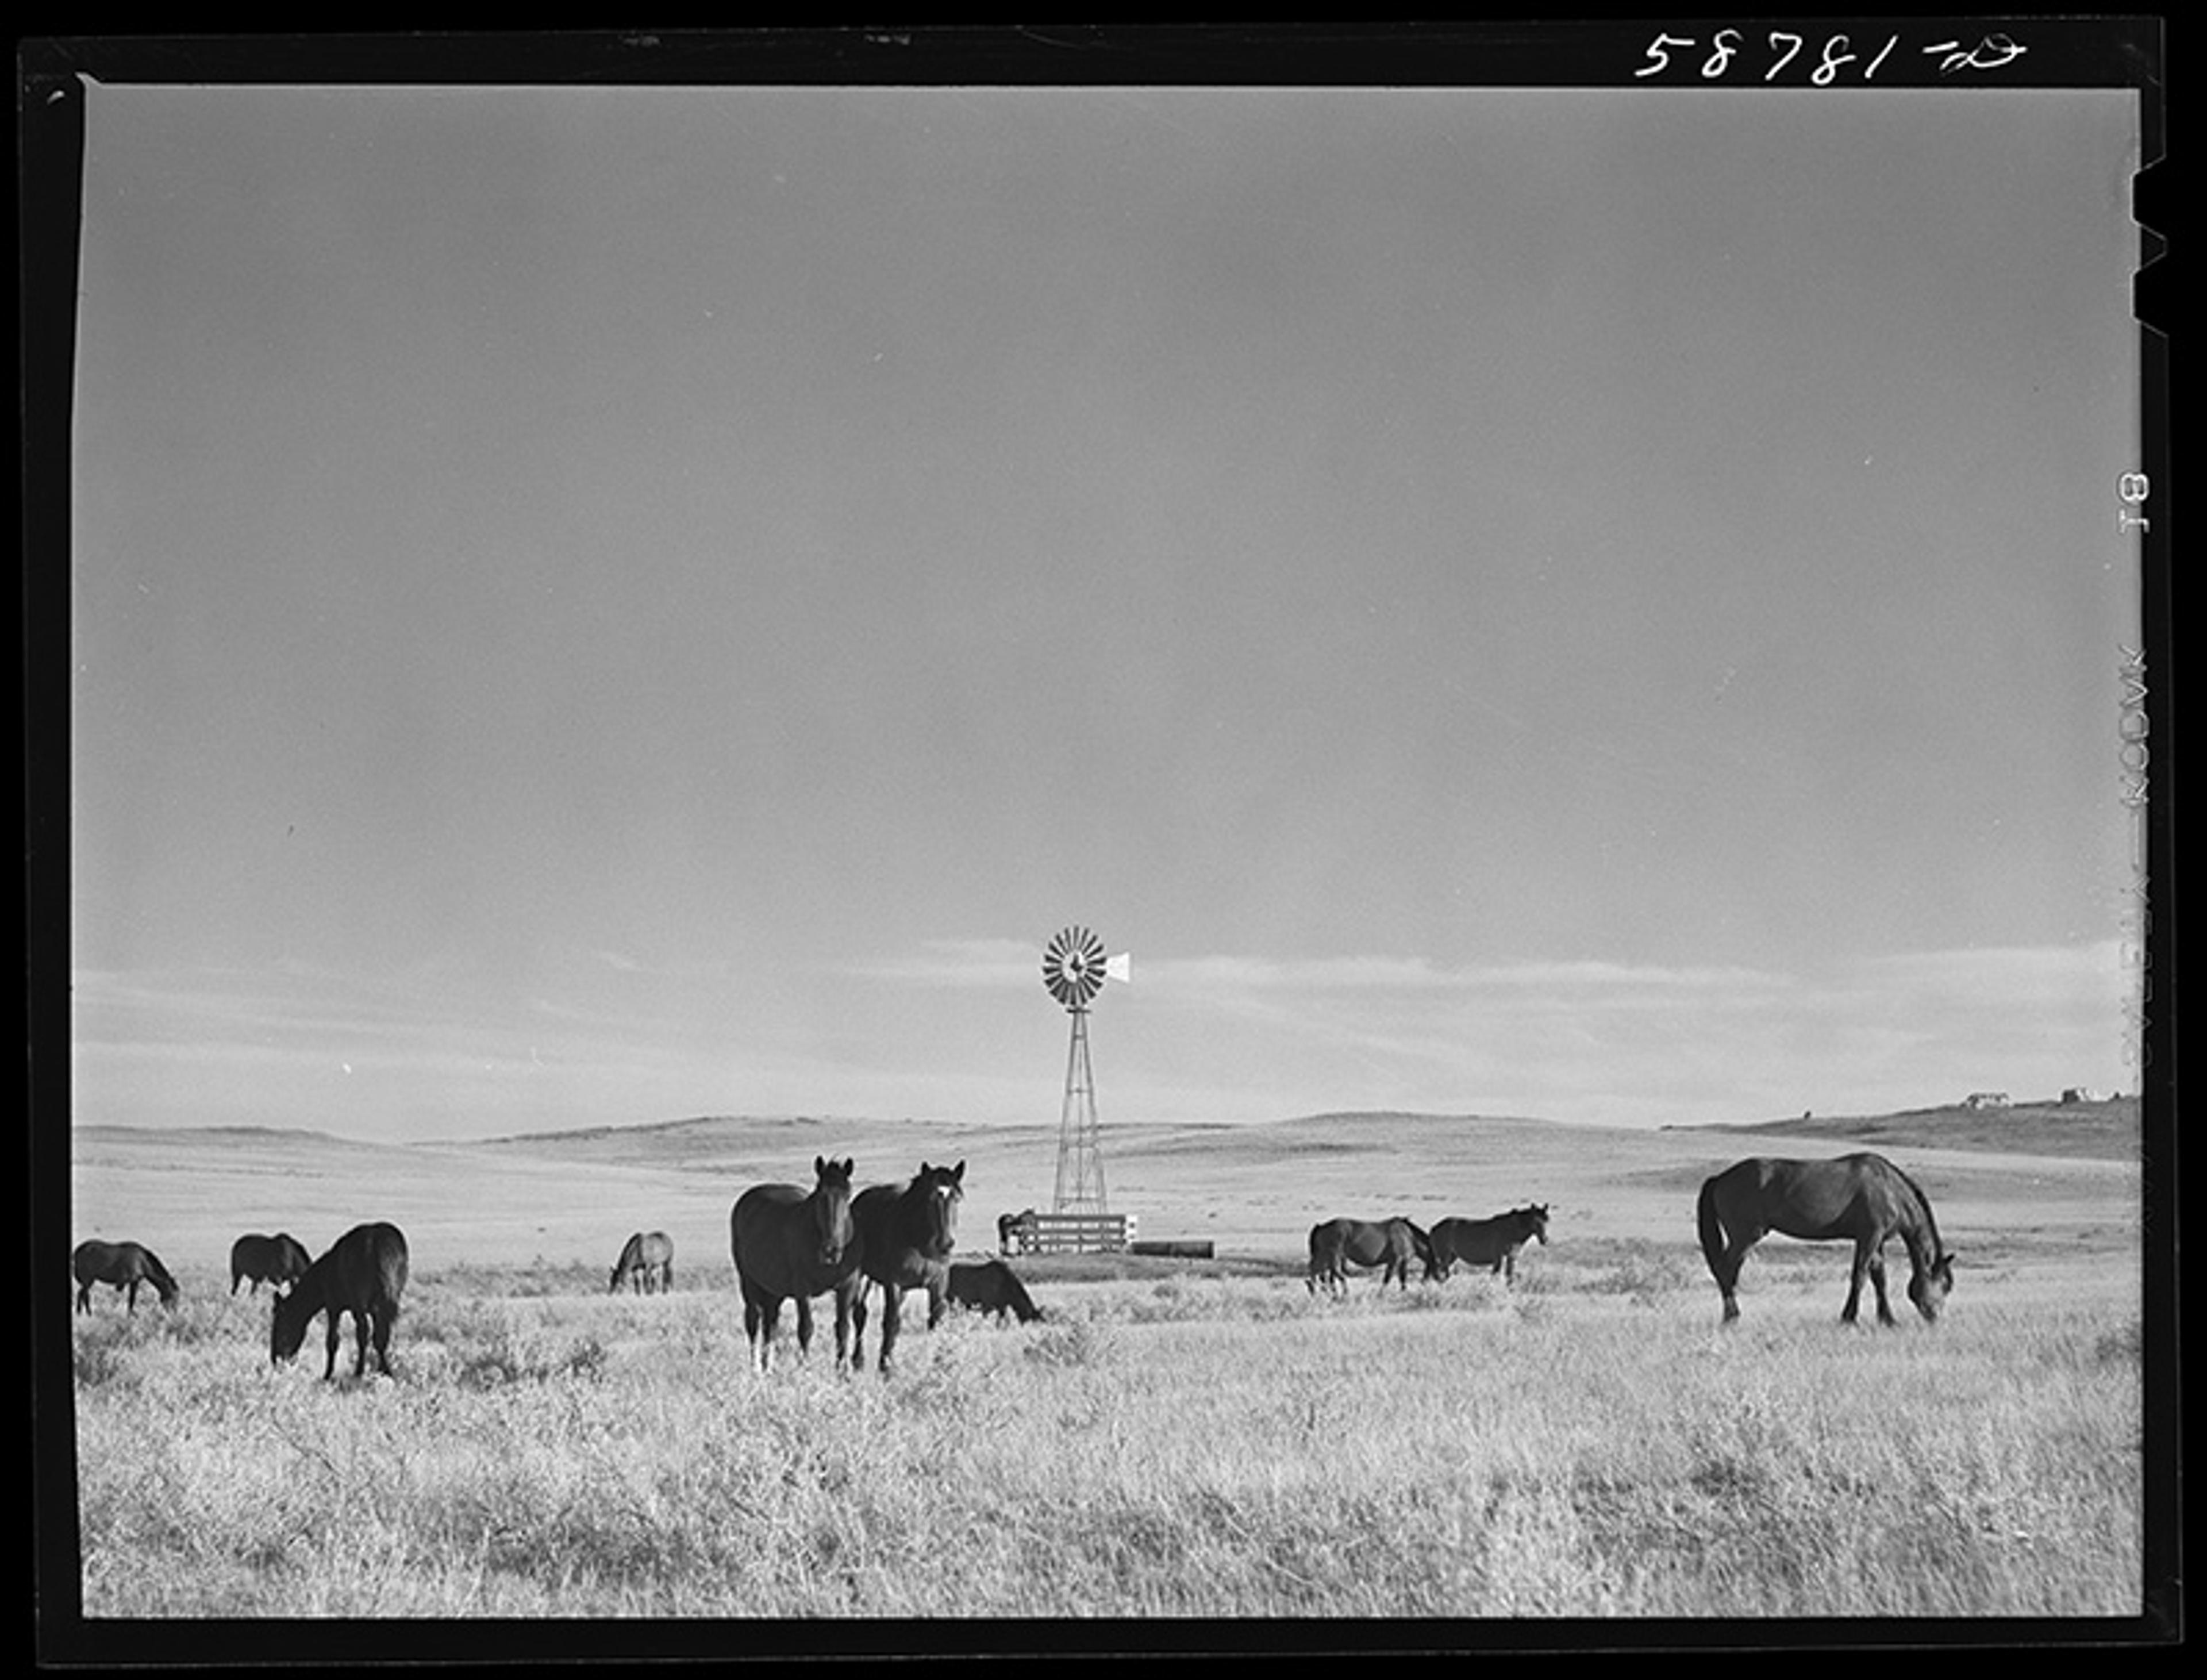 Black-and-white photograph of horses grazing in a grassy field with a windmill and vast sky in the background.